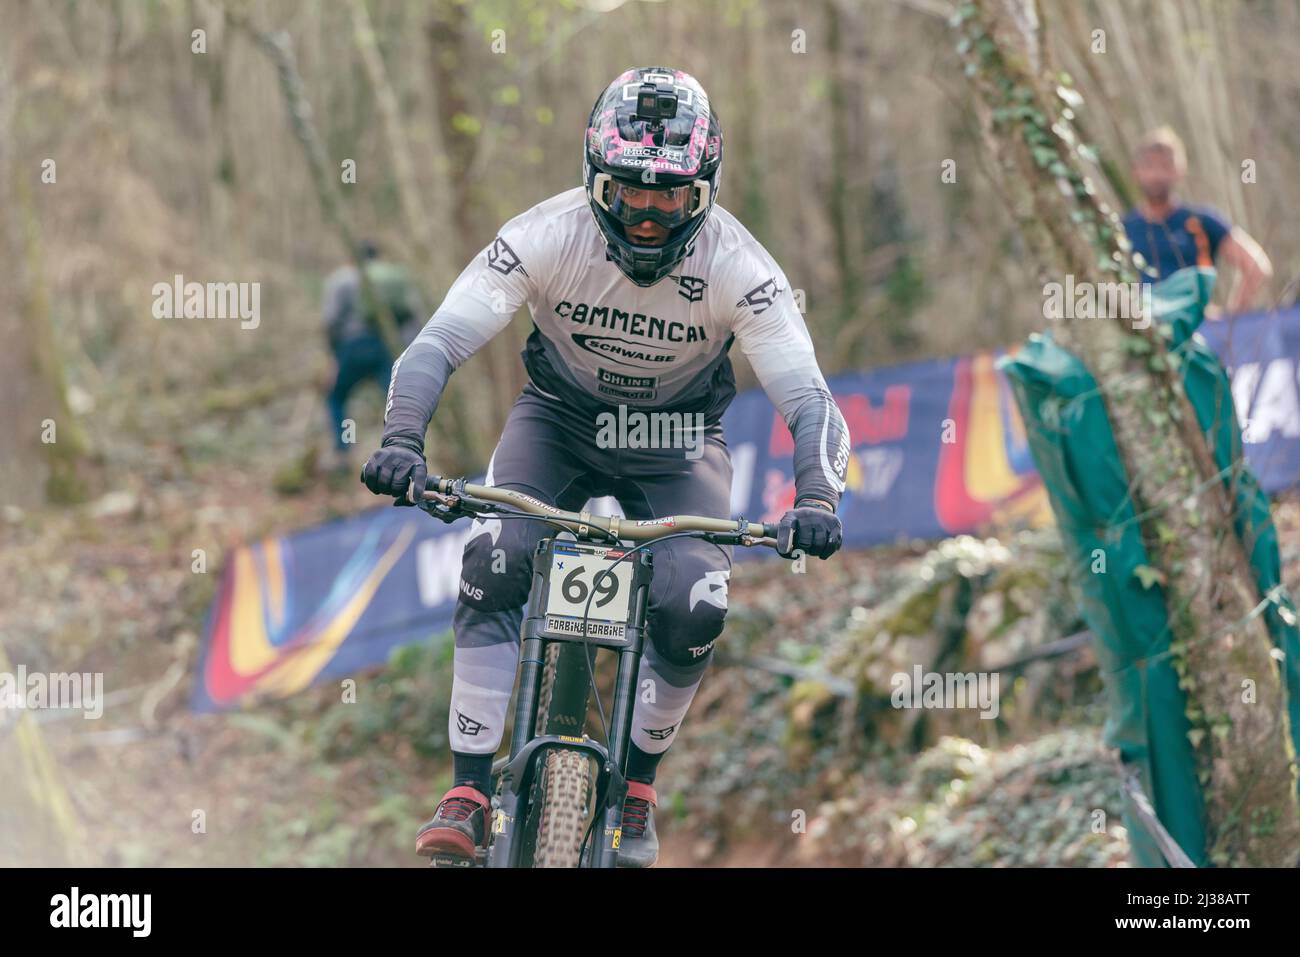 Lourdes, France : 2022 March 27 : Pau MENOYO BUSQUETS SPA competes during the UCI Mountain Bike Downhill World Cup 2022 race at the Lourdes, France. Stock Photo